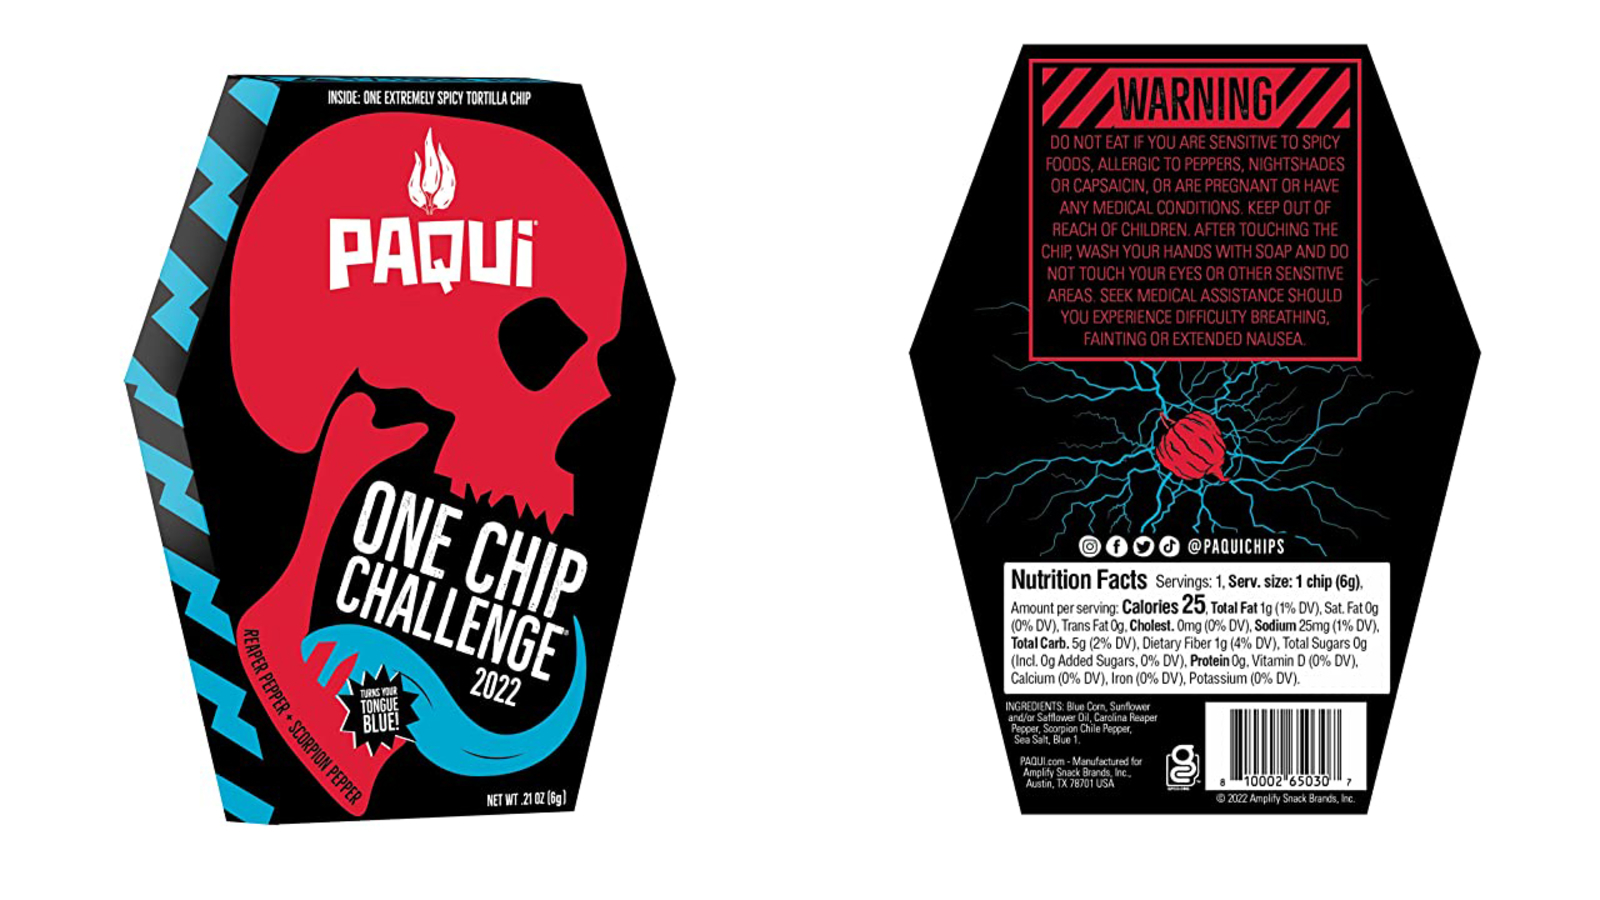 Spicy chip challenge Pearland ISD bans viral 'Paqui One Chip Challenge